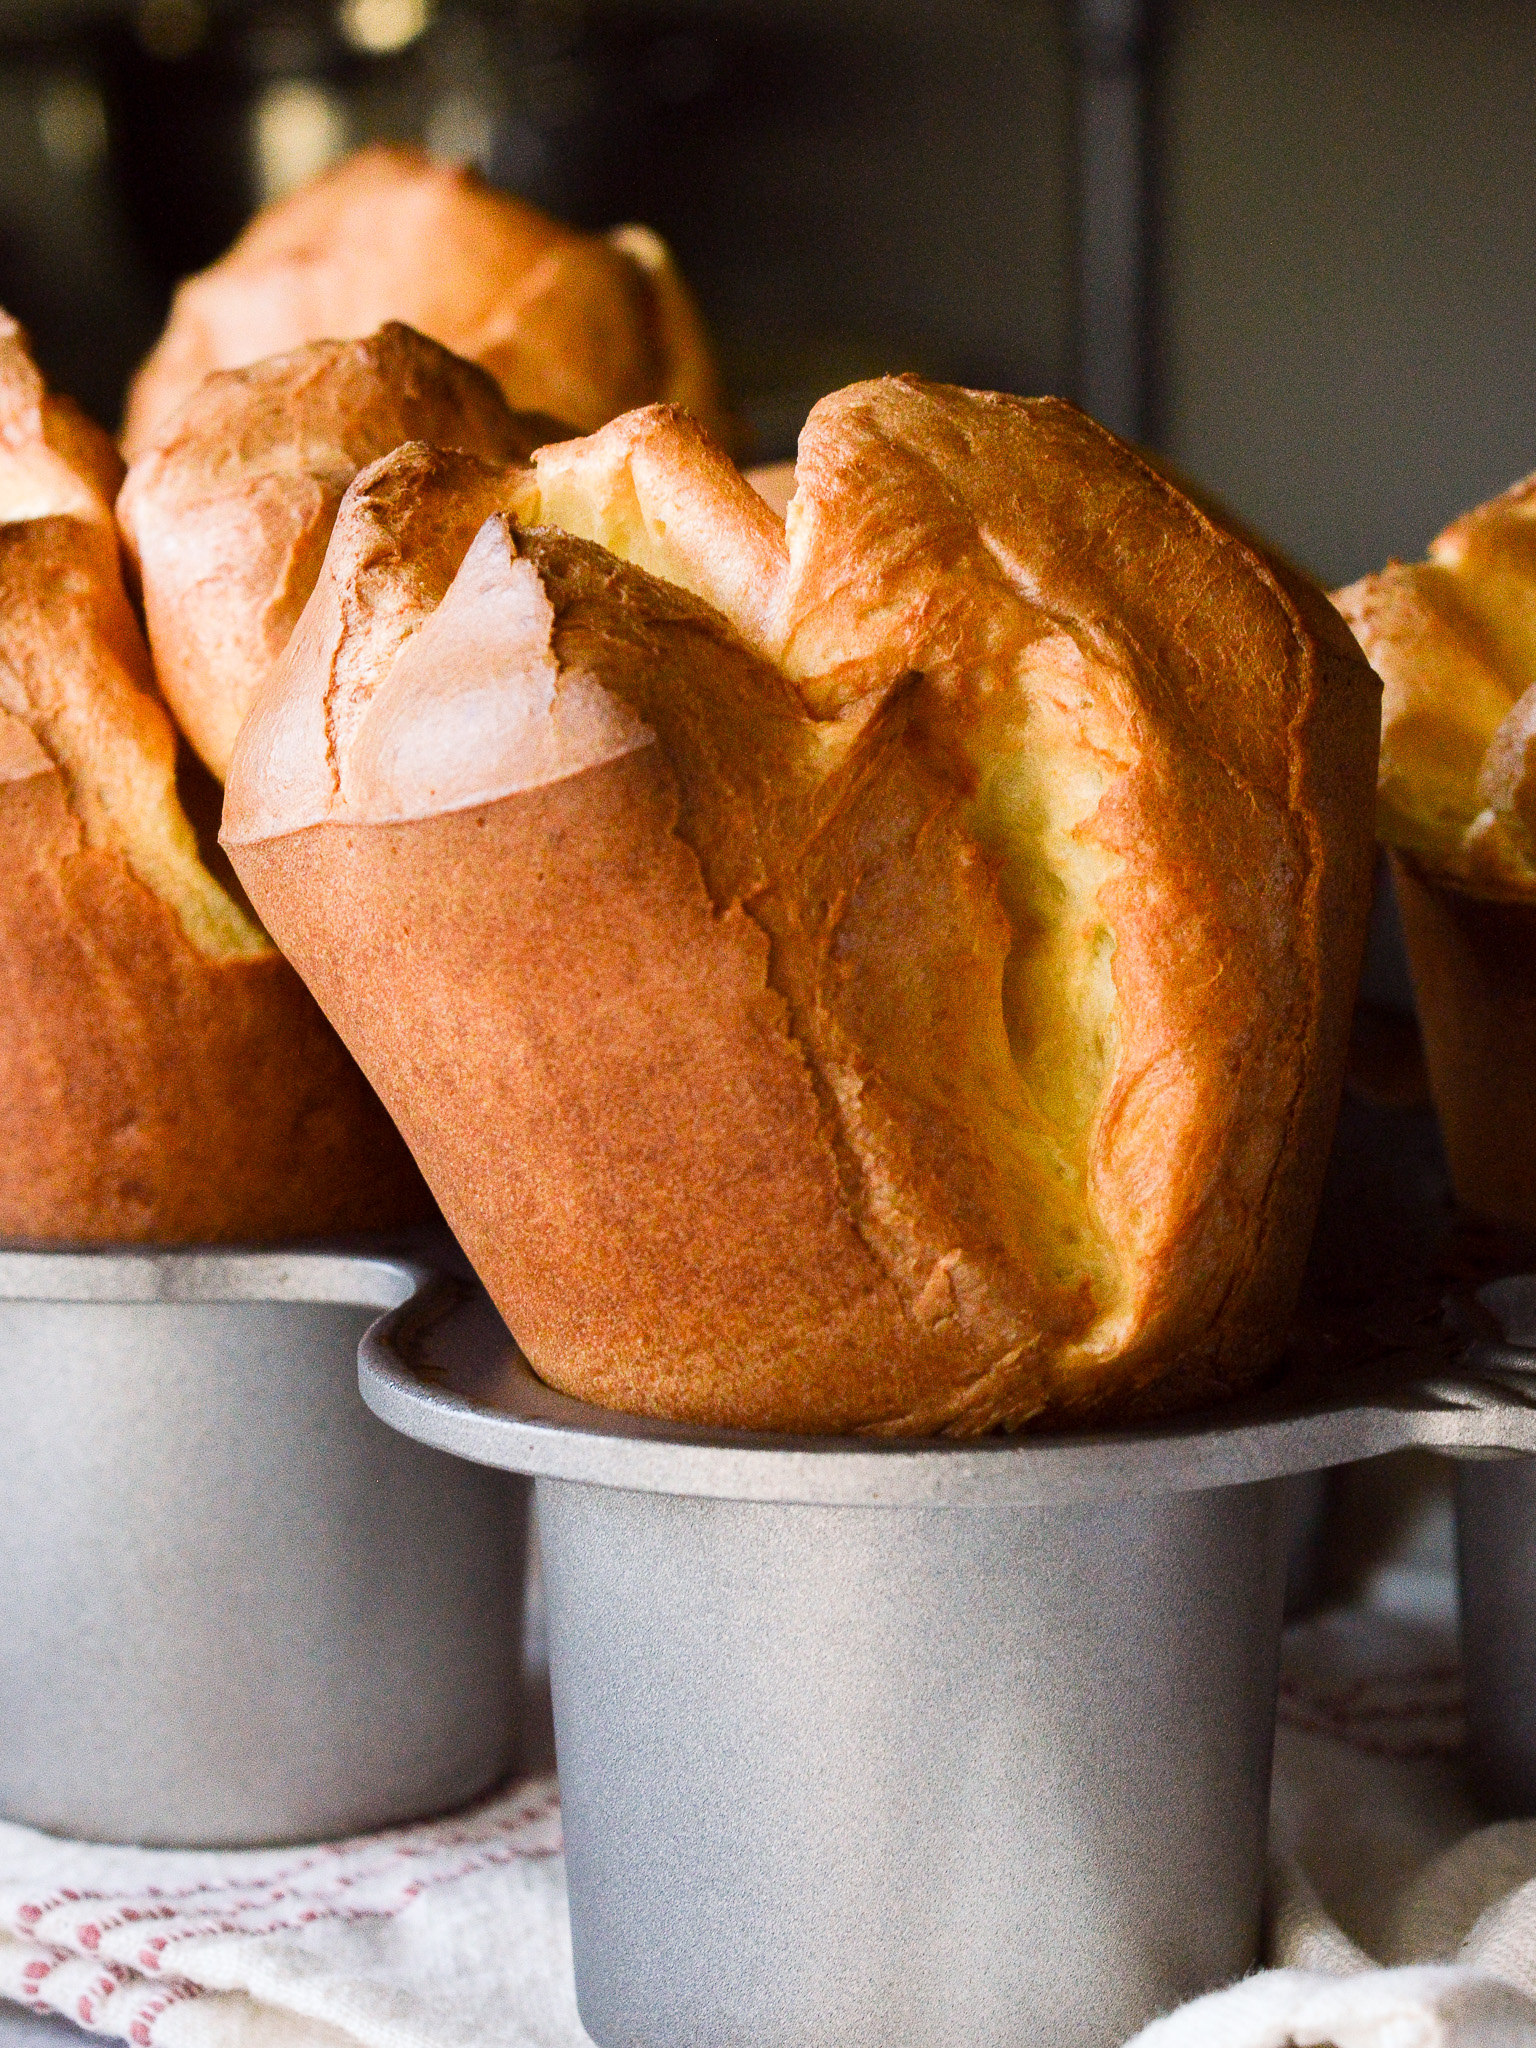 https://www.sugardishme.com/wp-content/uploads/2021/03/How-to-Make-Popovers-with-a-Blender.jpg